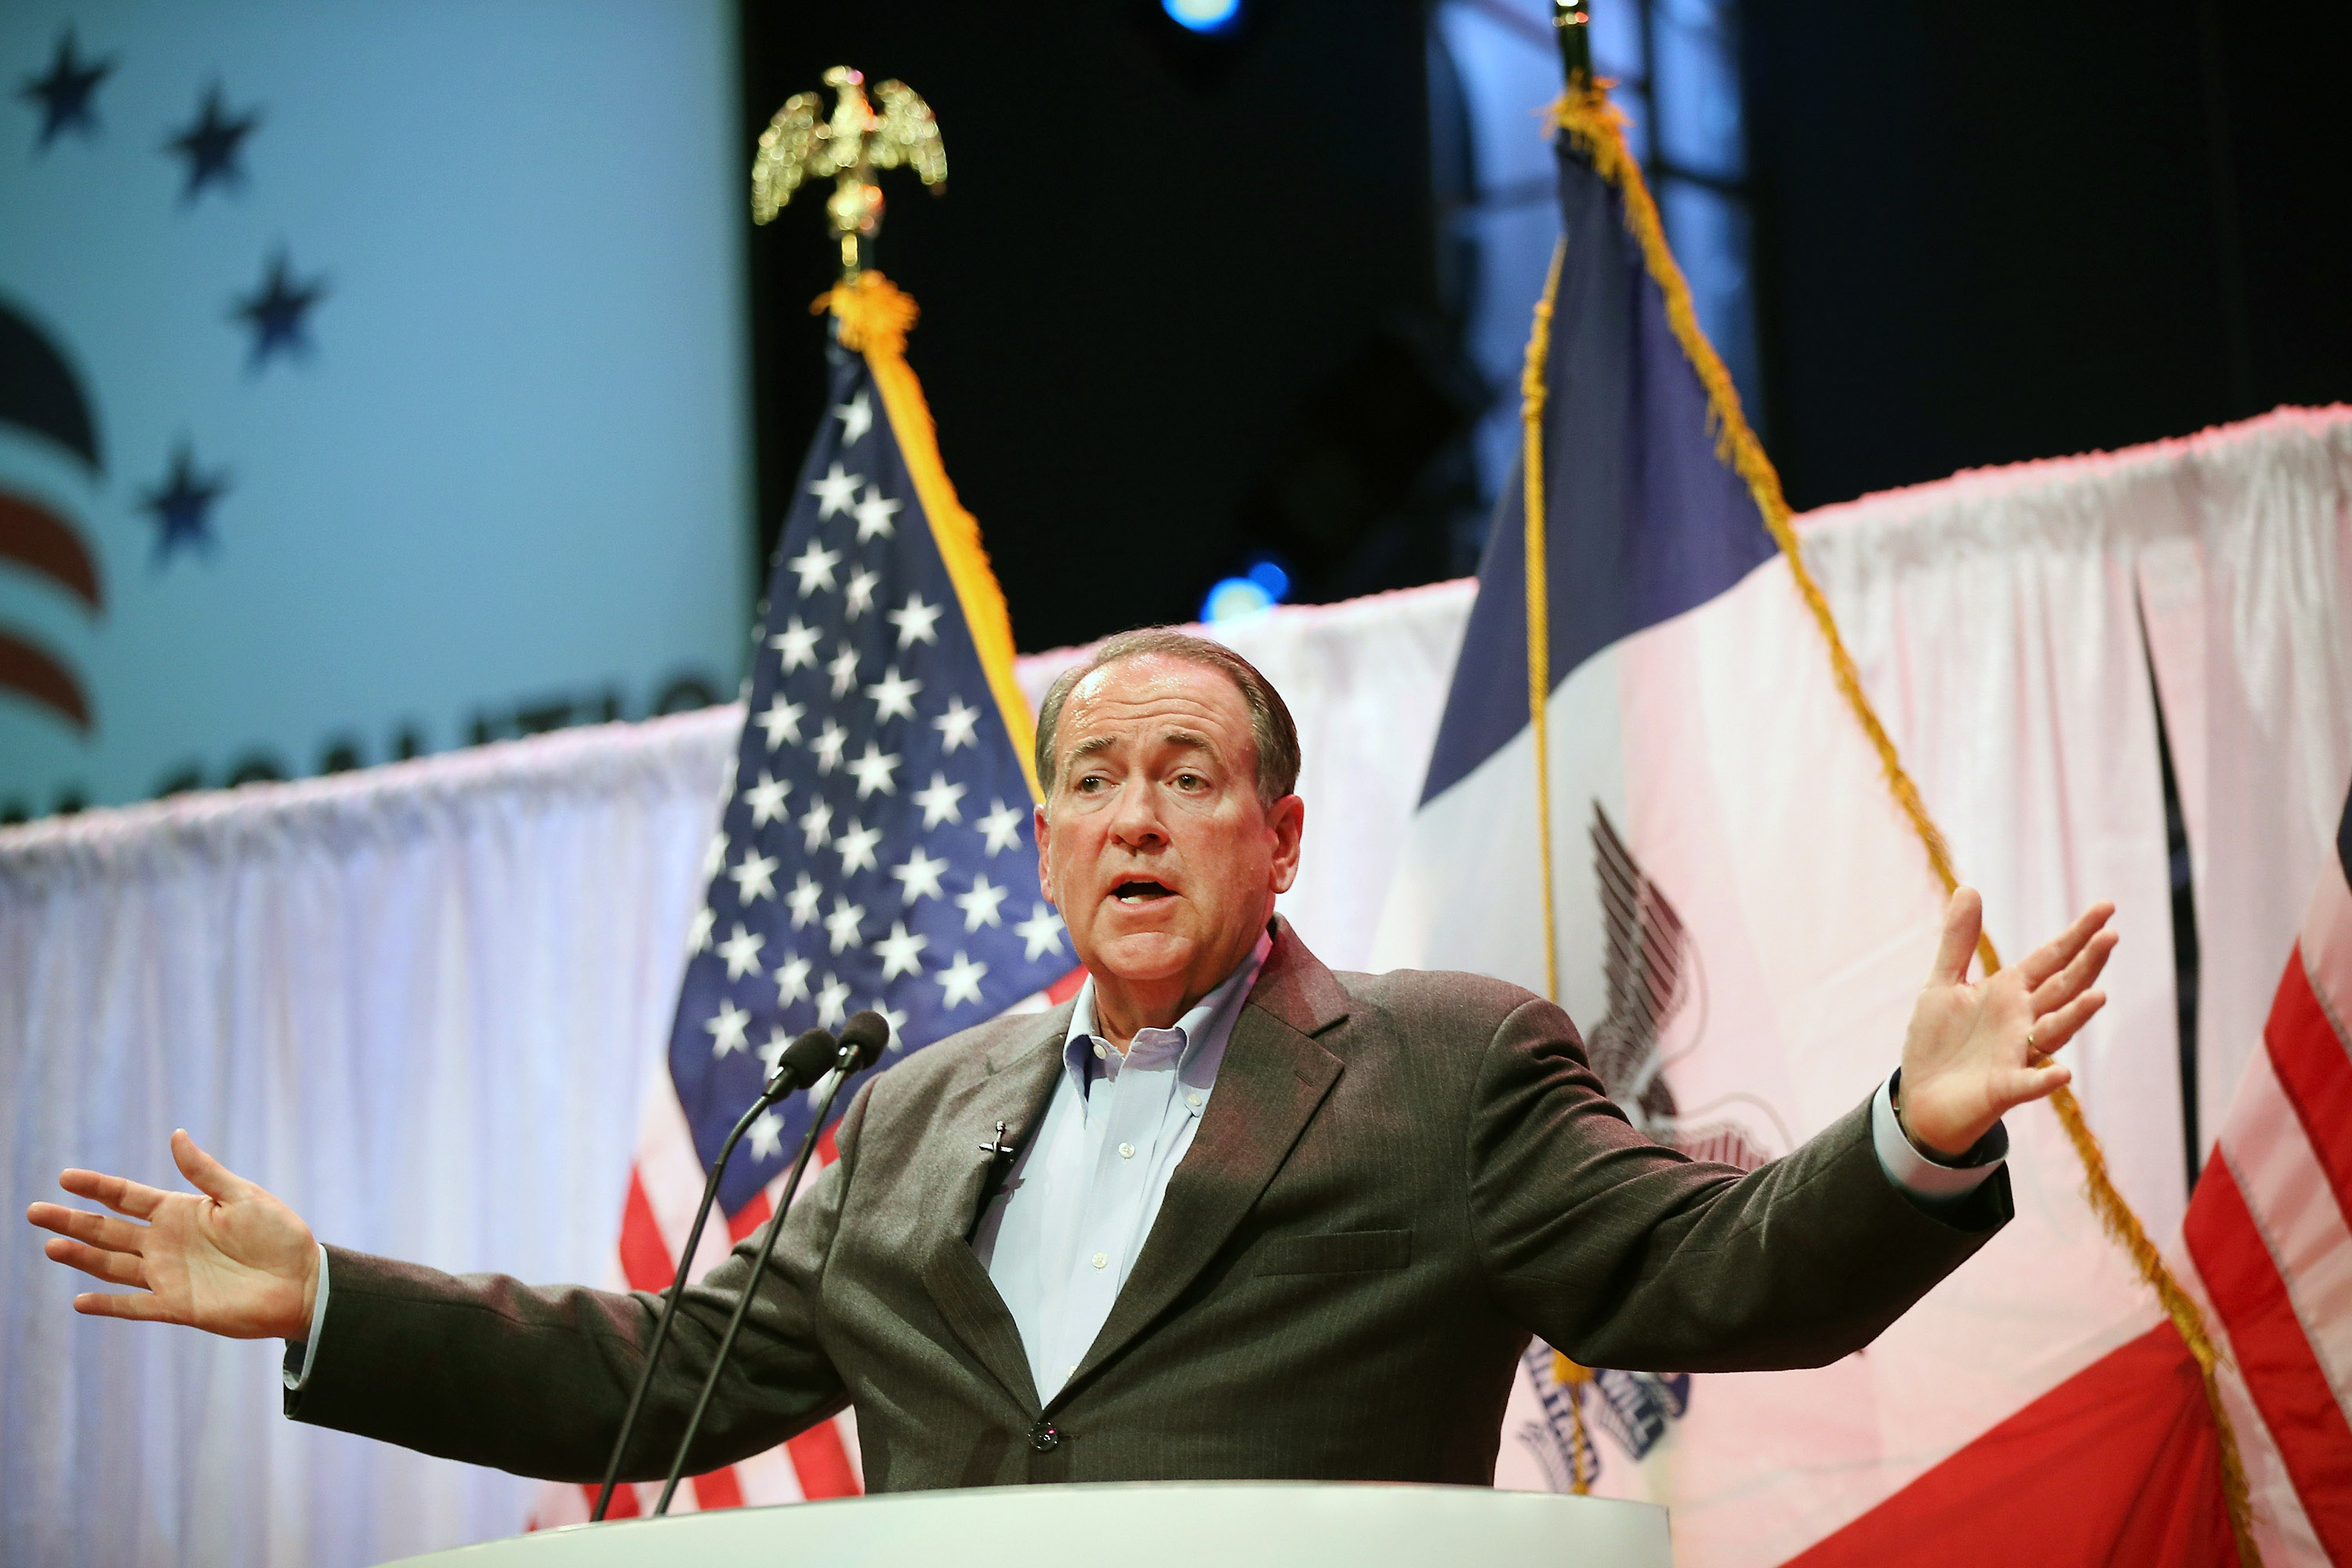 Huckabee Same Sex Marriage Opponents Will Go The Path Of